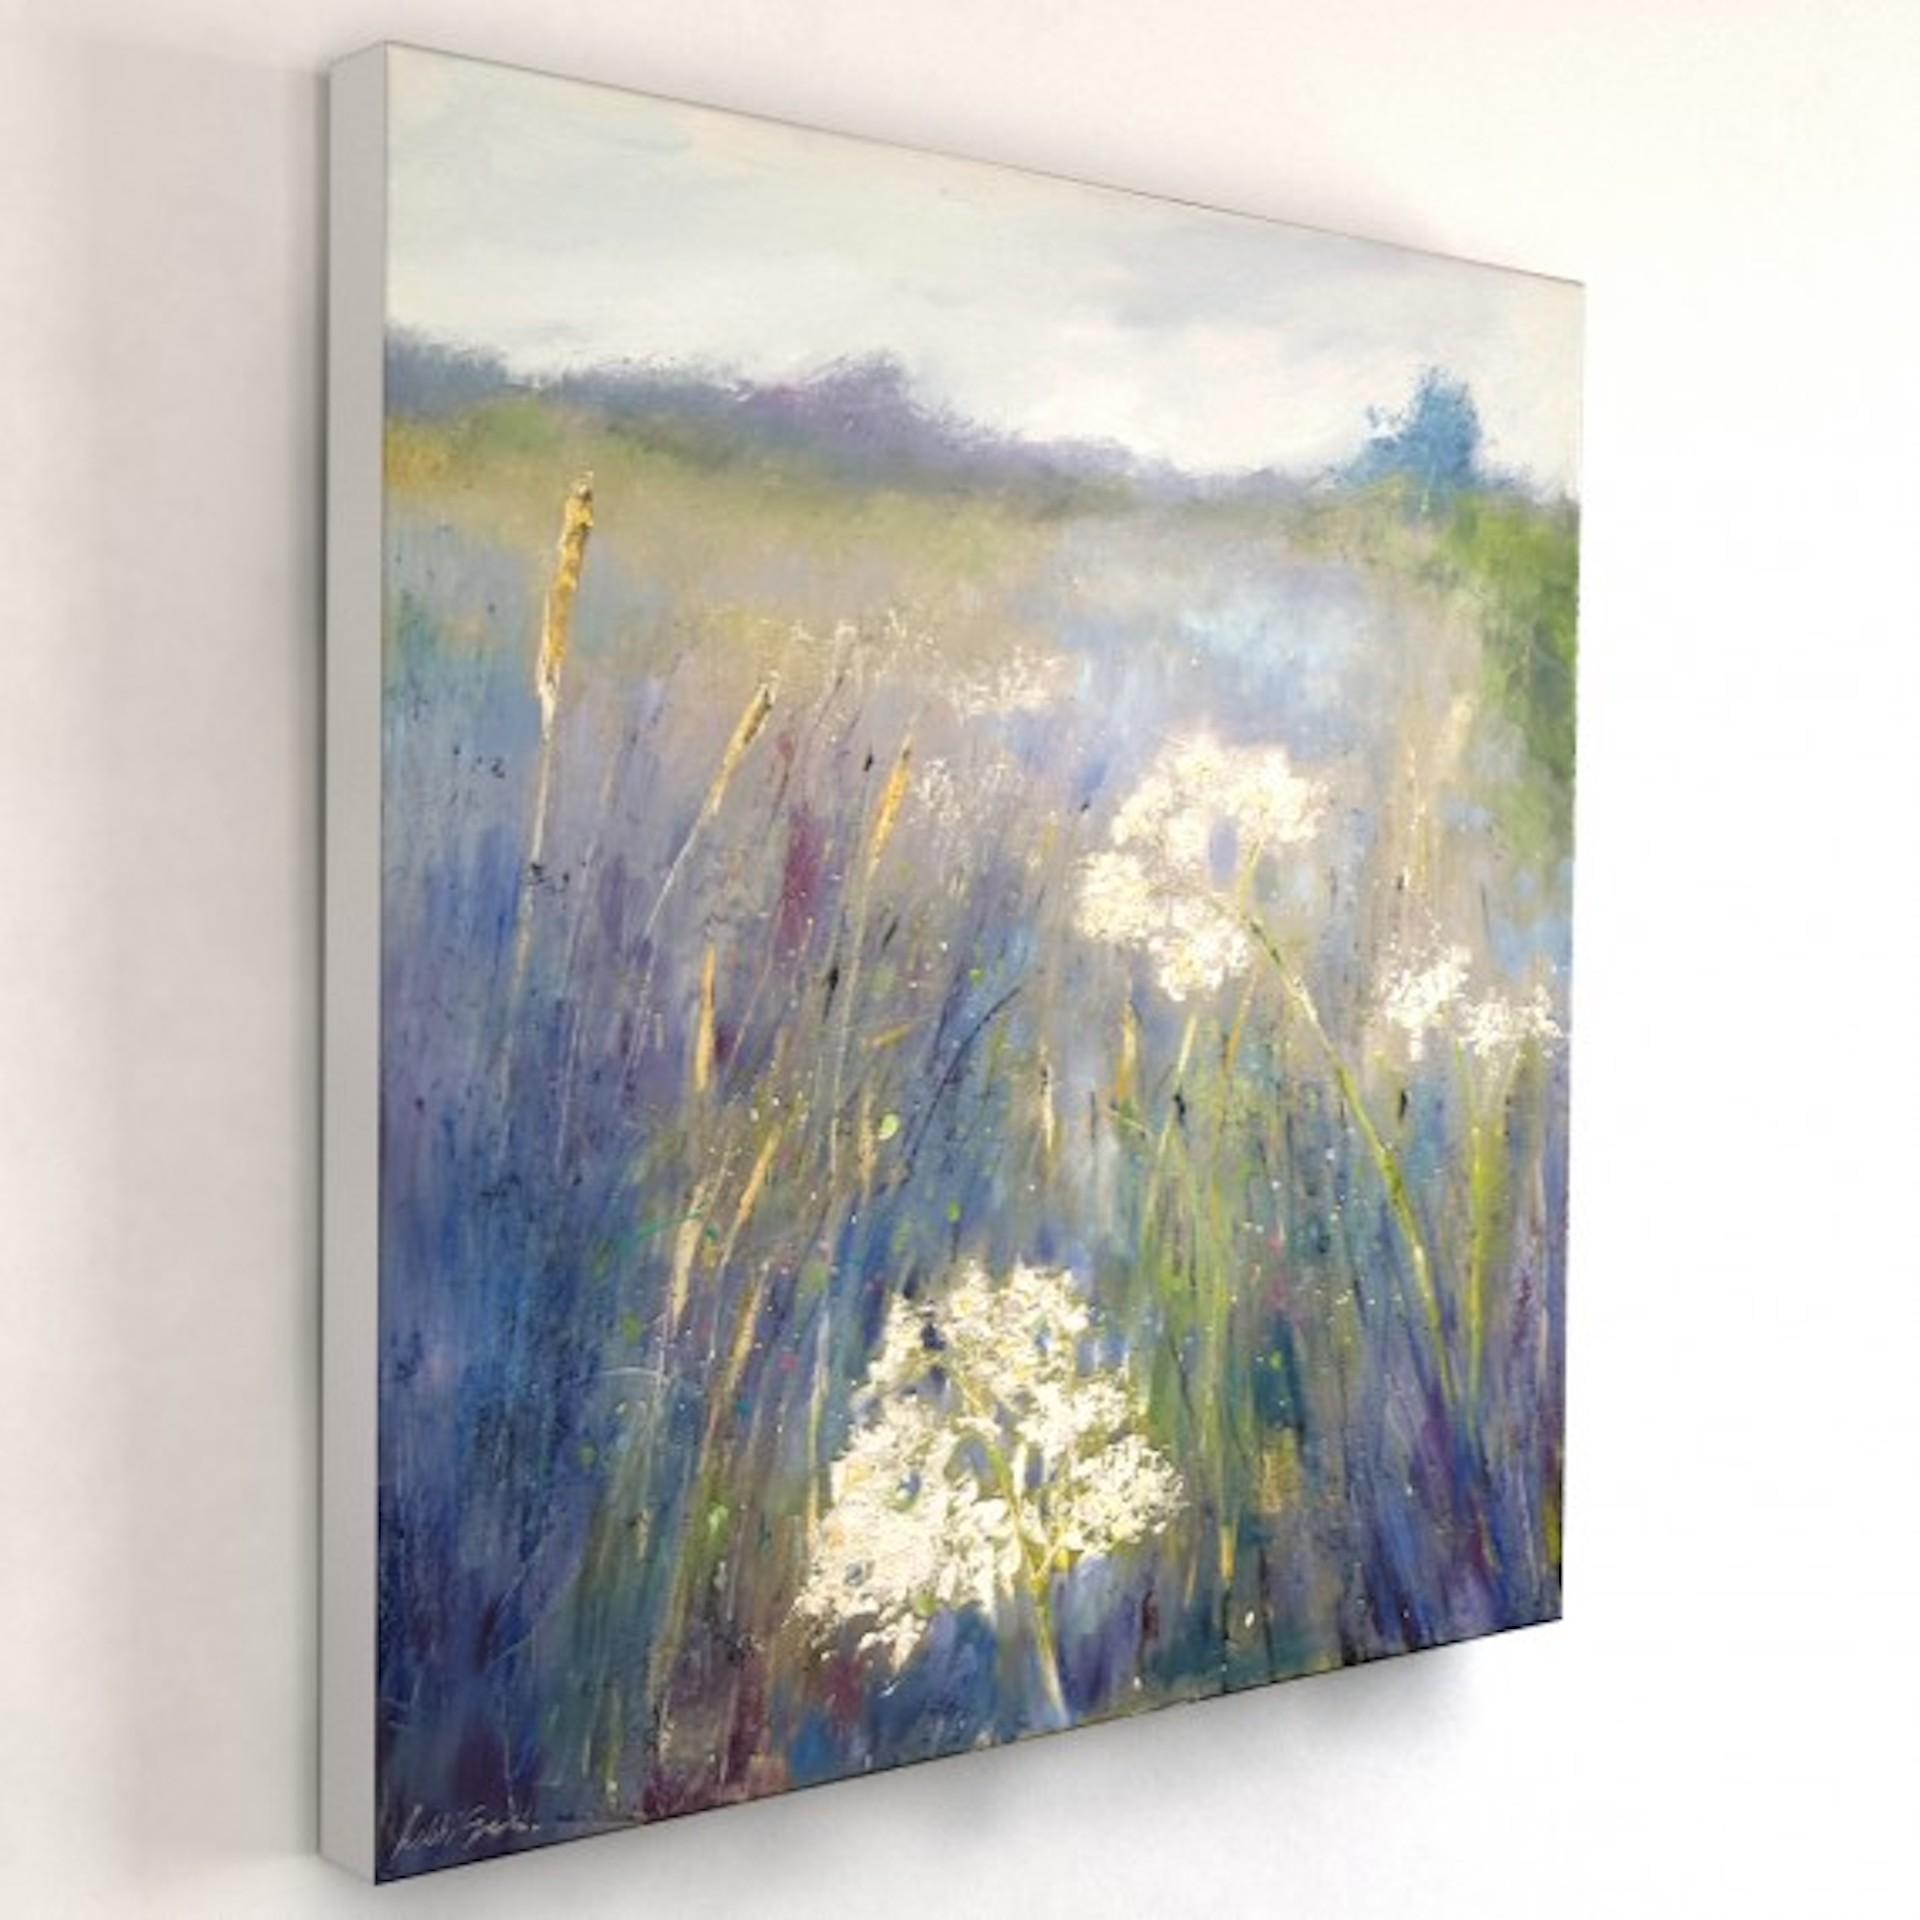 Early Morning Dew [2020]
Original
Landscape
Oil Paint on Canvas
Complete Size of Unframed Work: H:80 cm x W:80 cm x D:5cm
Sold Unframed
Please note that insitu images are purely an indication of how a piece may look.

Libbi Gooch is self-taught, so